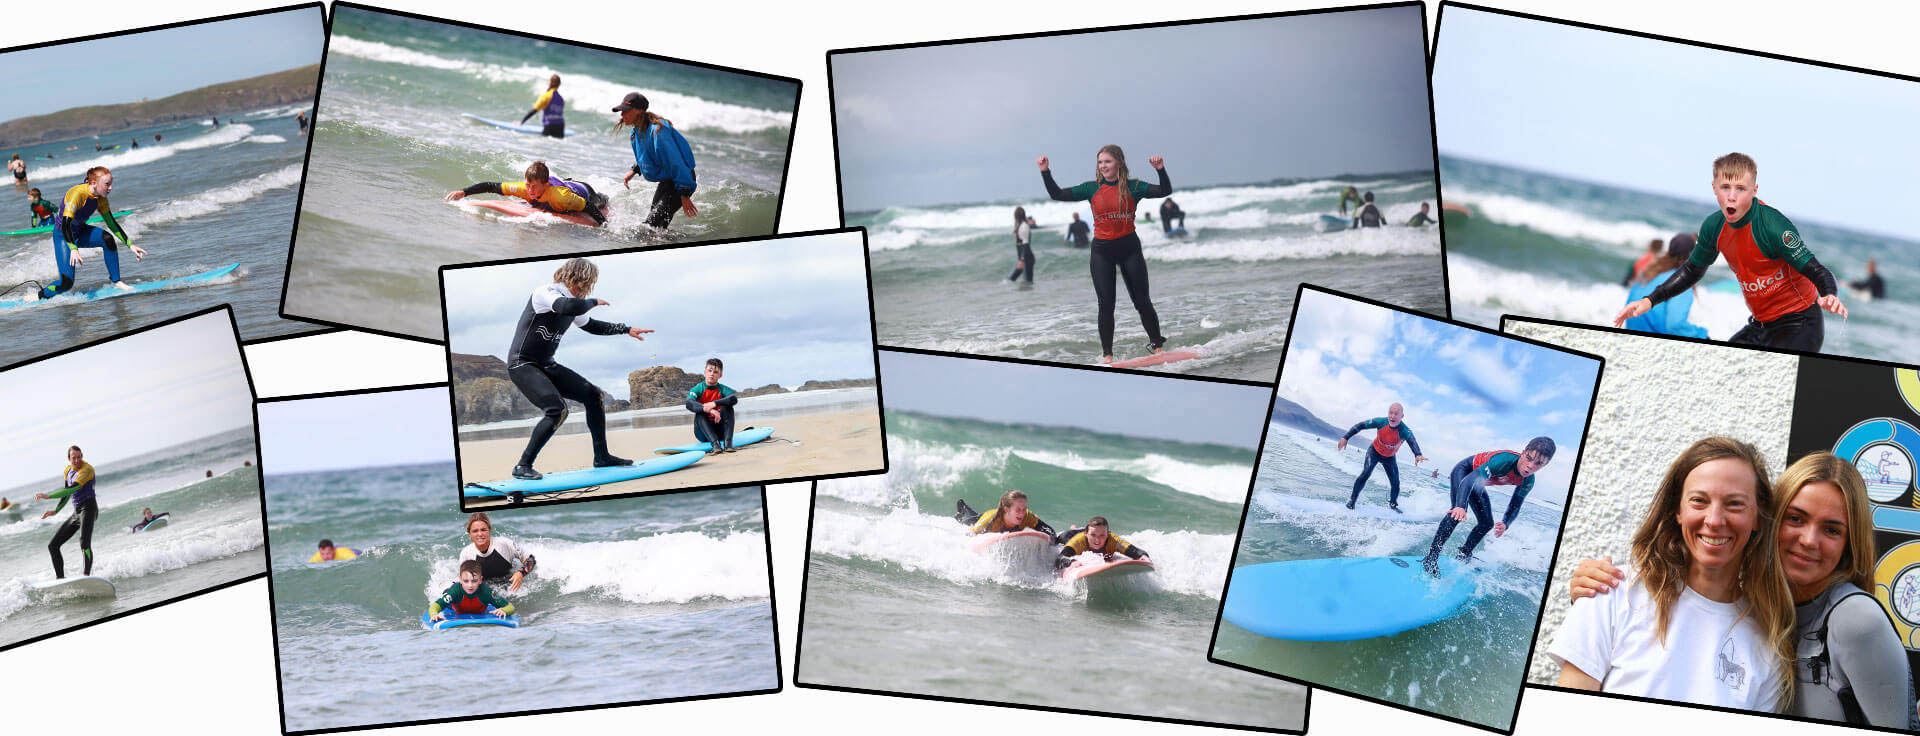 A collage of pictures showing good times at Stoked Surf School